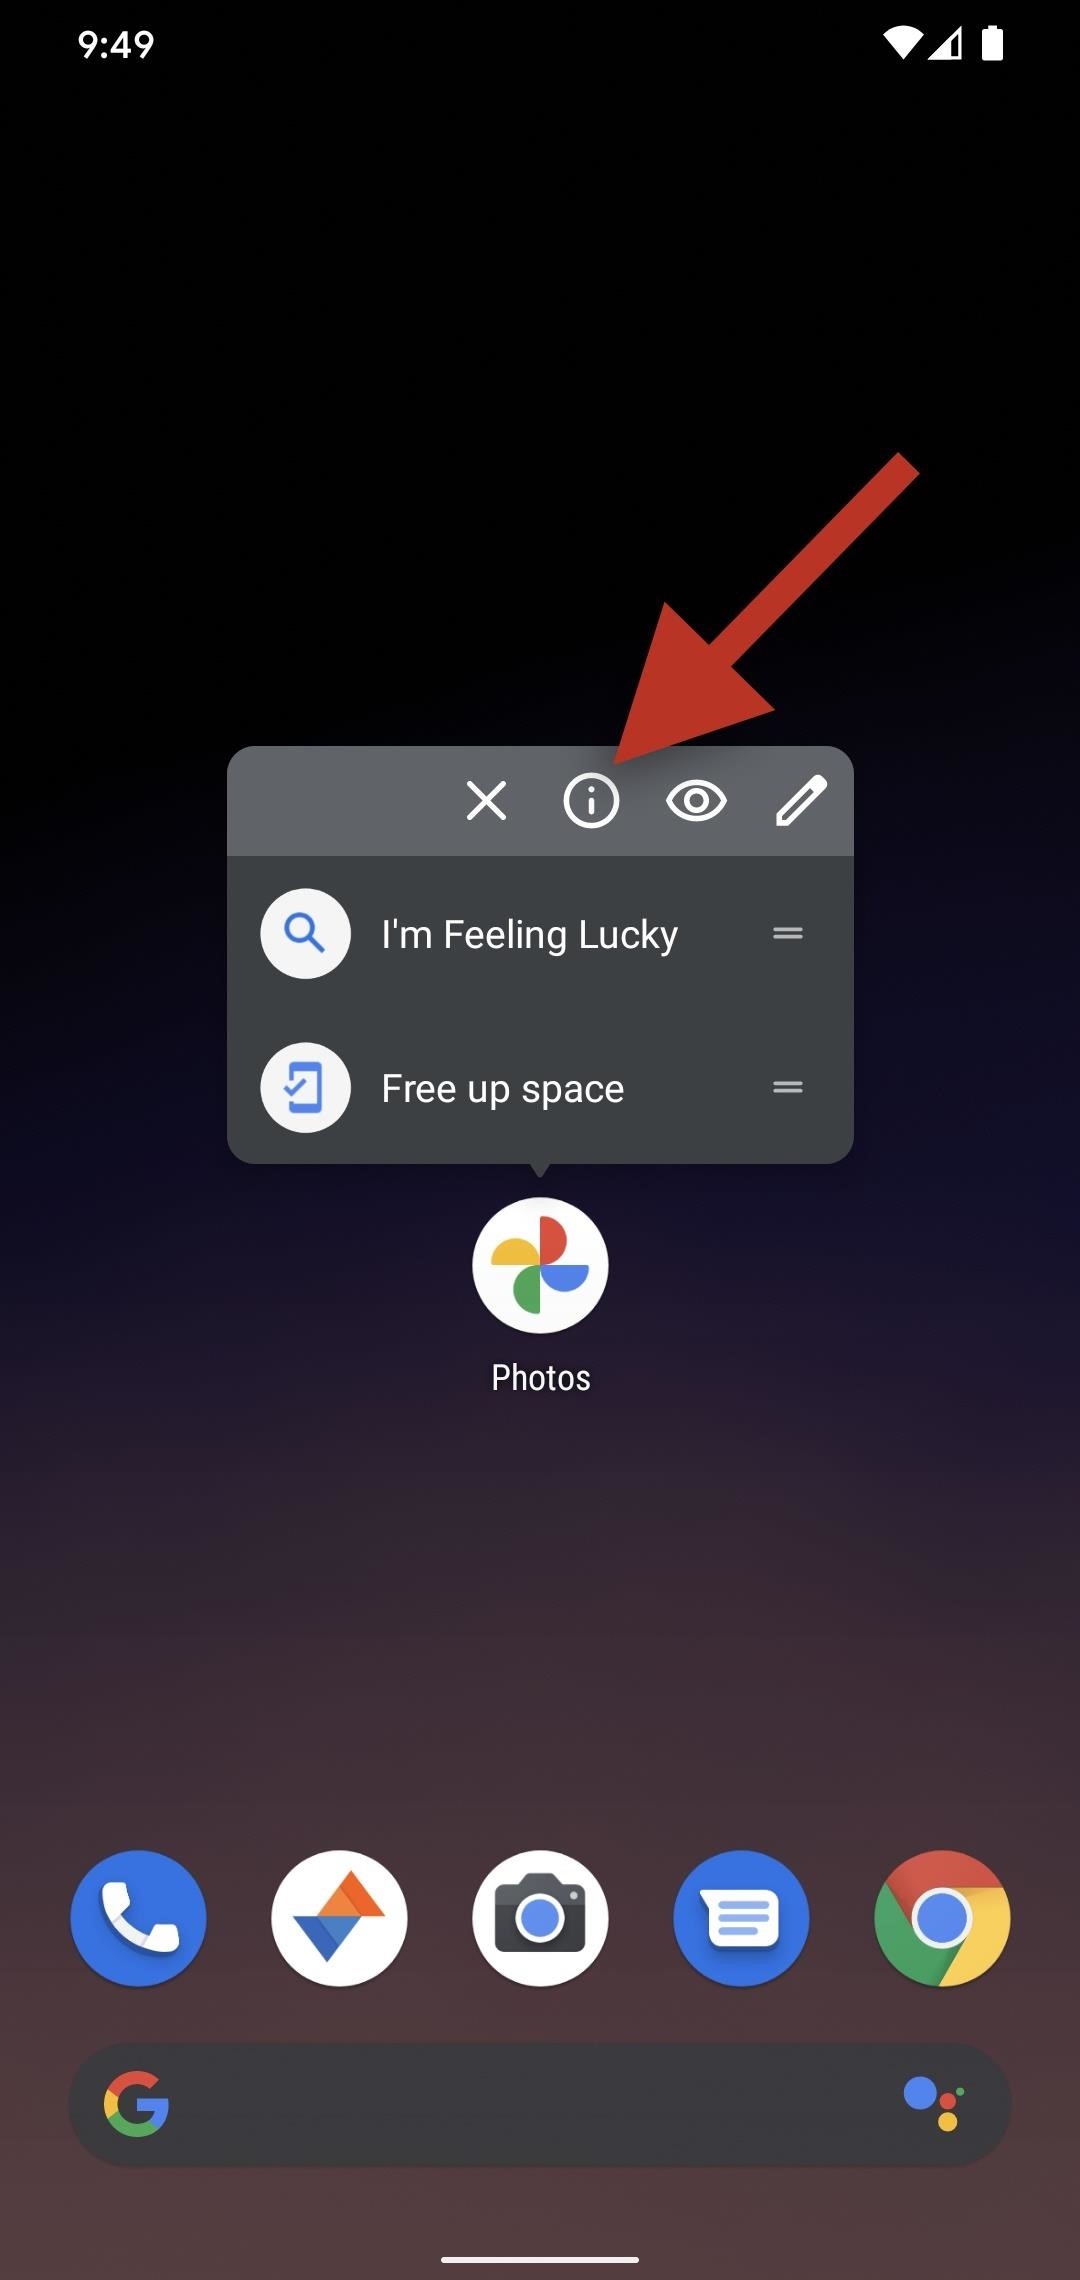 How to Use Portrait Lighting in Google Photos to Add an Adjustable Key Light to Pictures You've Already Taken